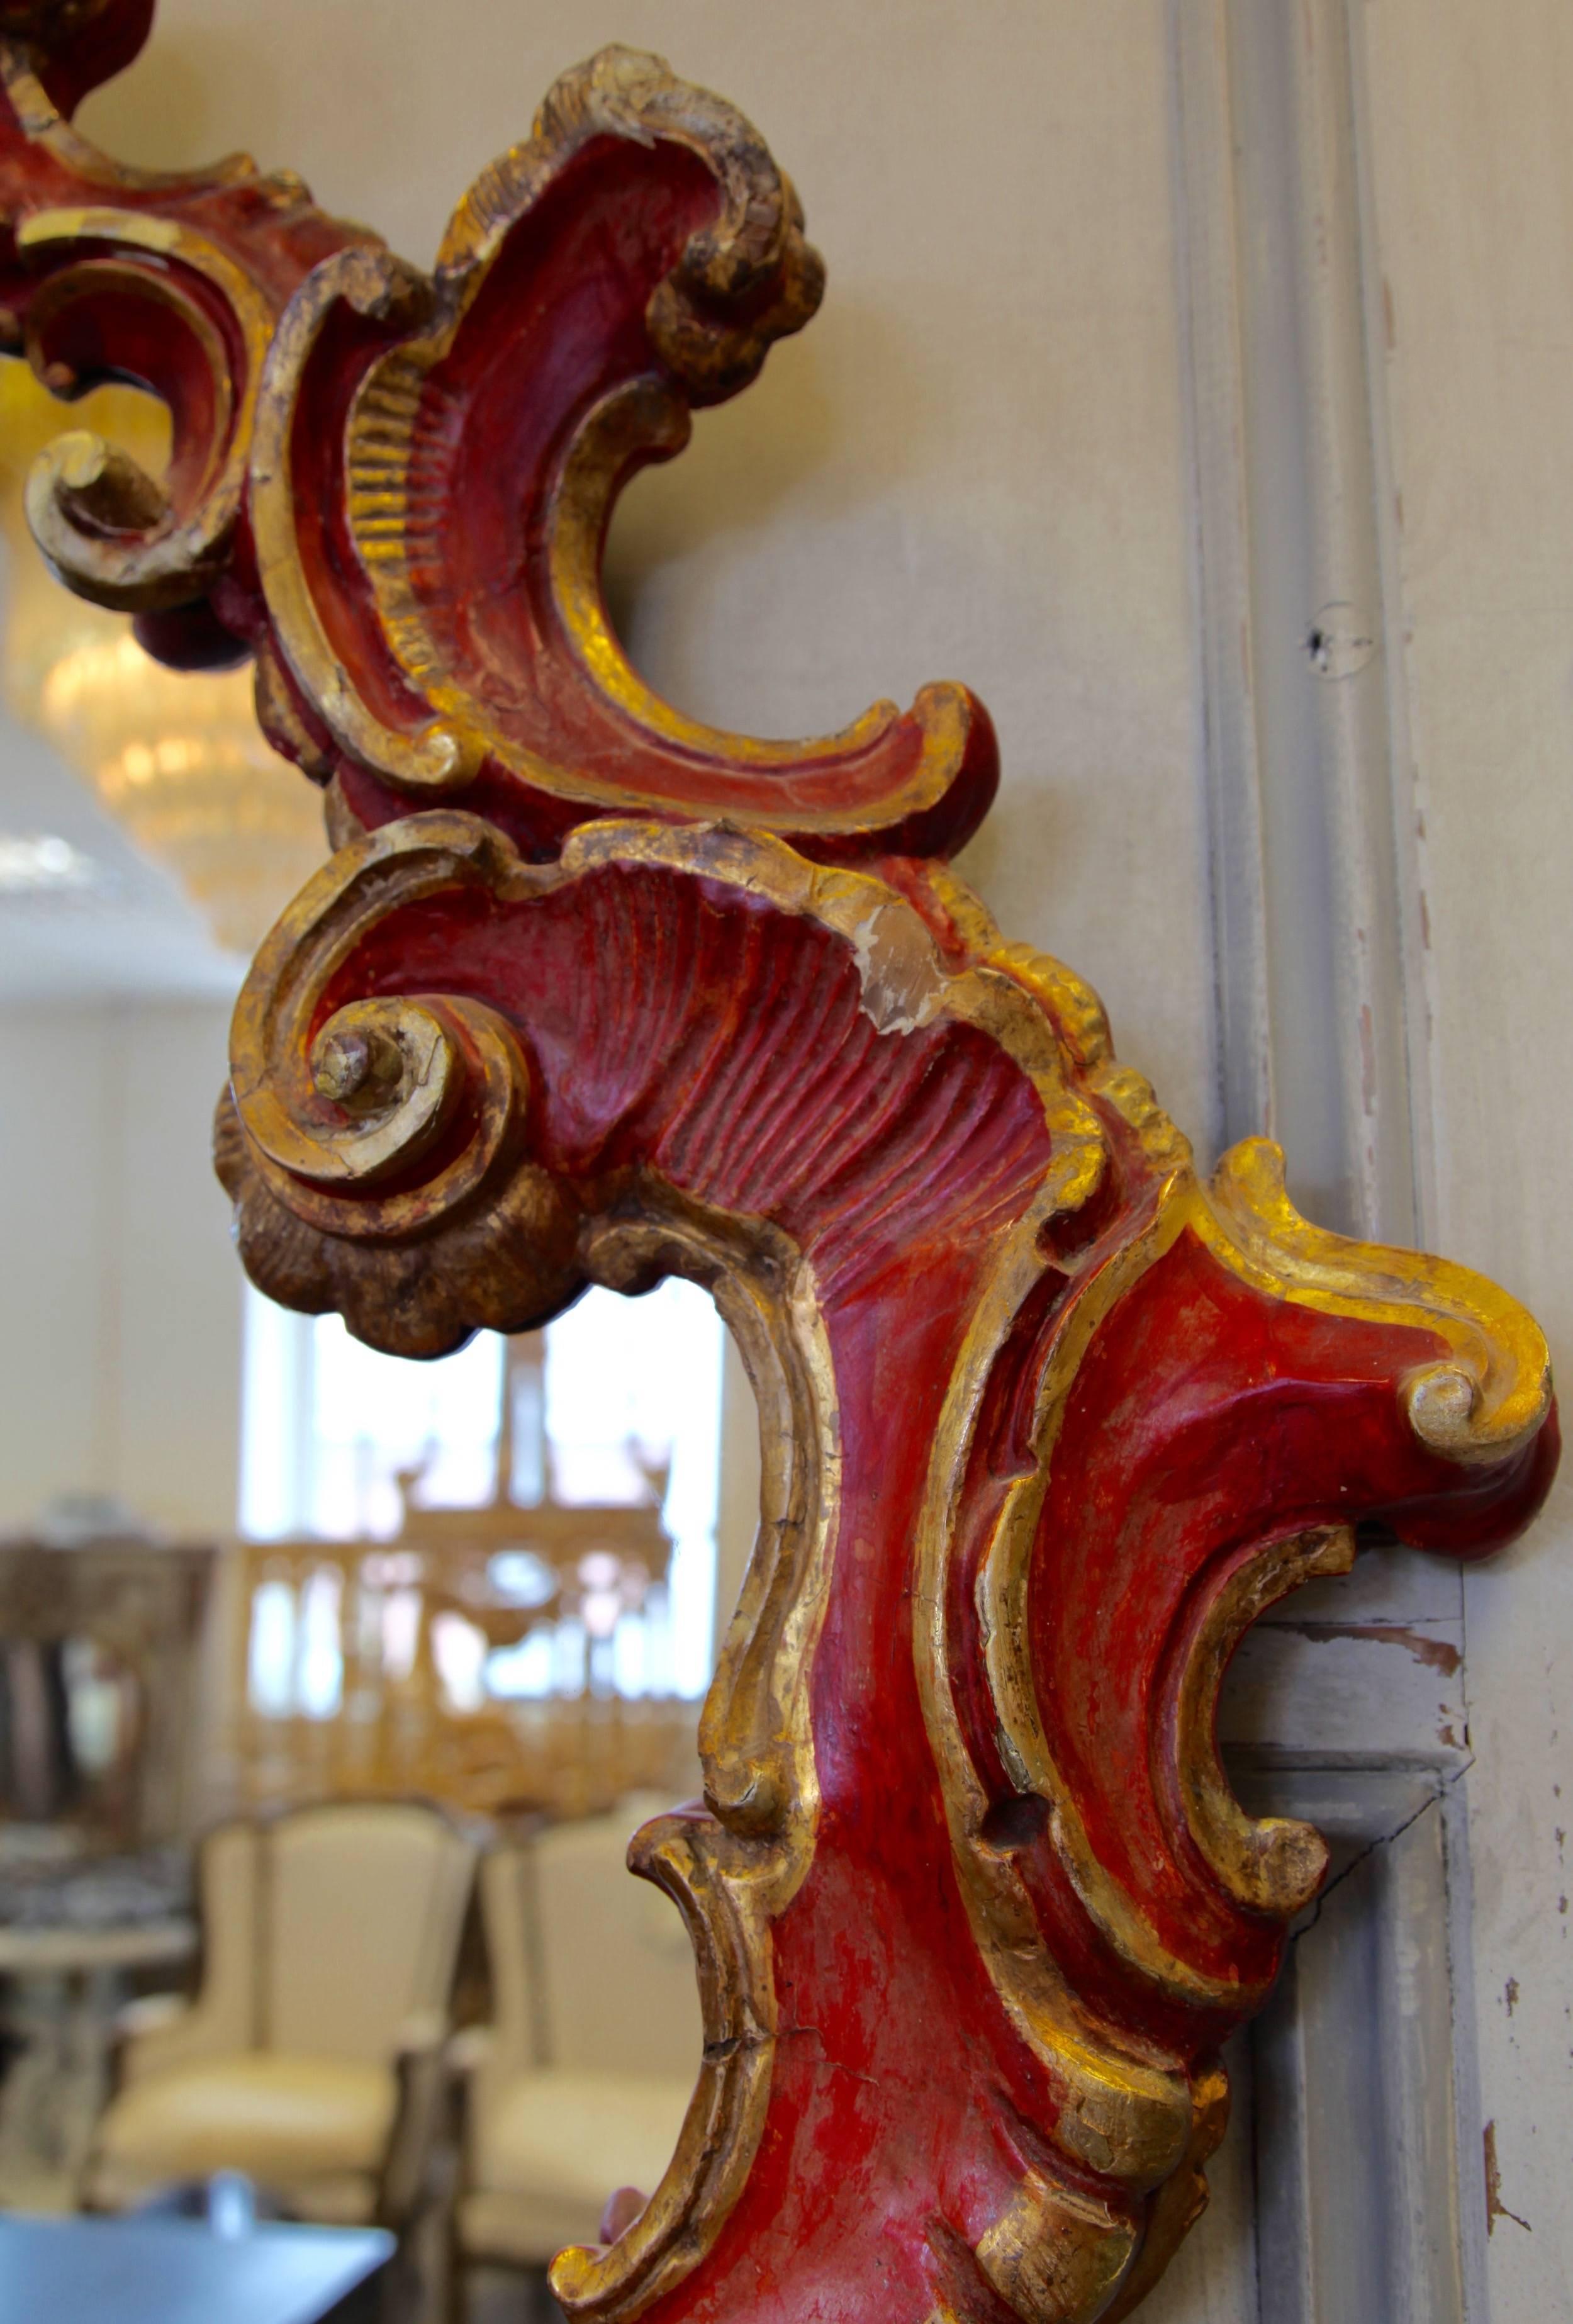 An 18th century Venetian mirror hand-carved in wood with original patina, finished in a deep red and gilded high lights. A beautiful and rare find.